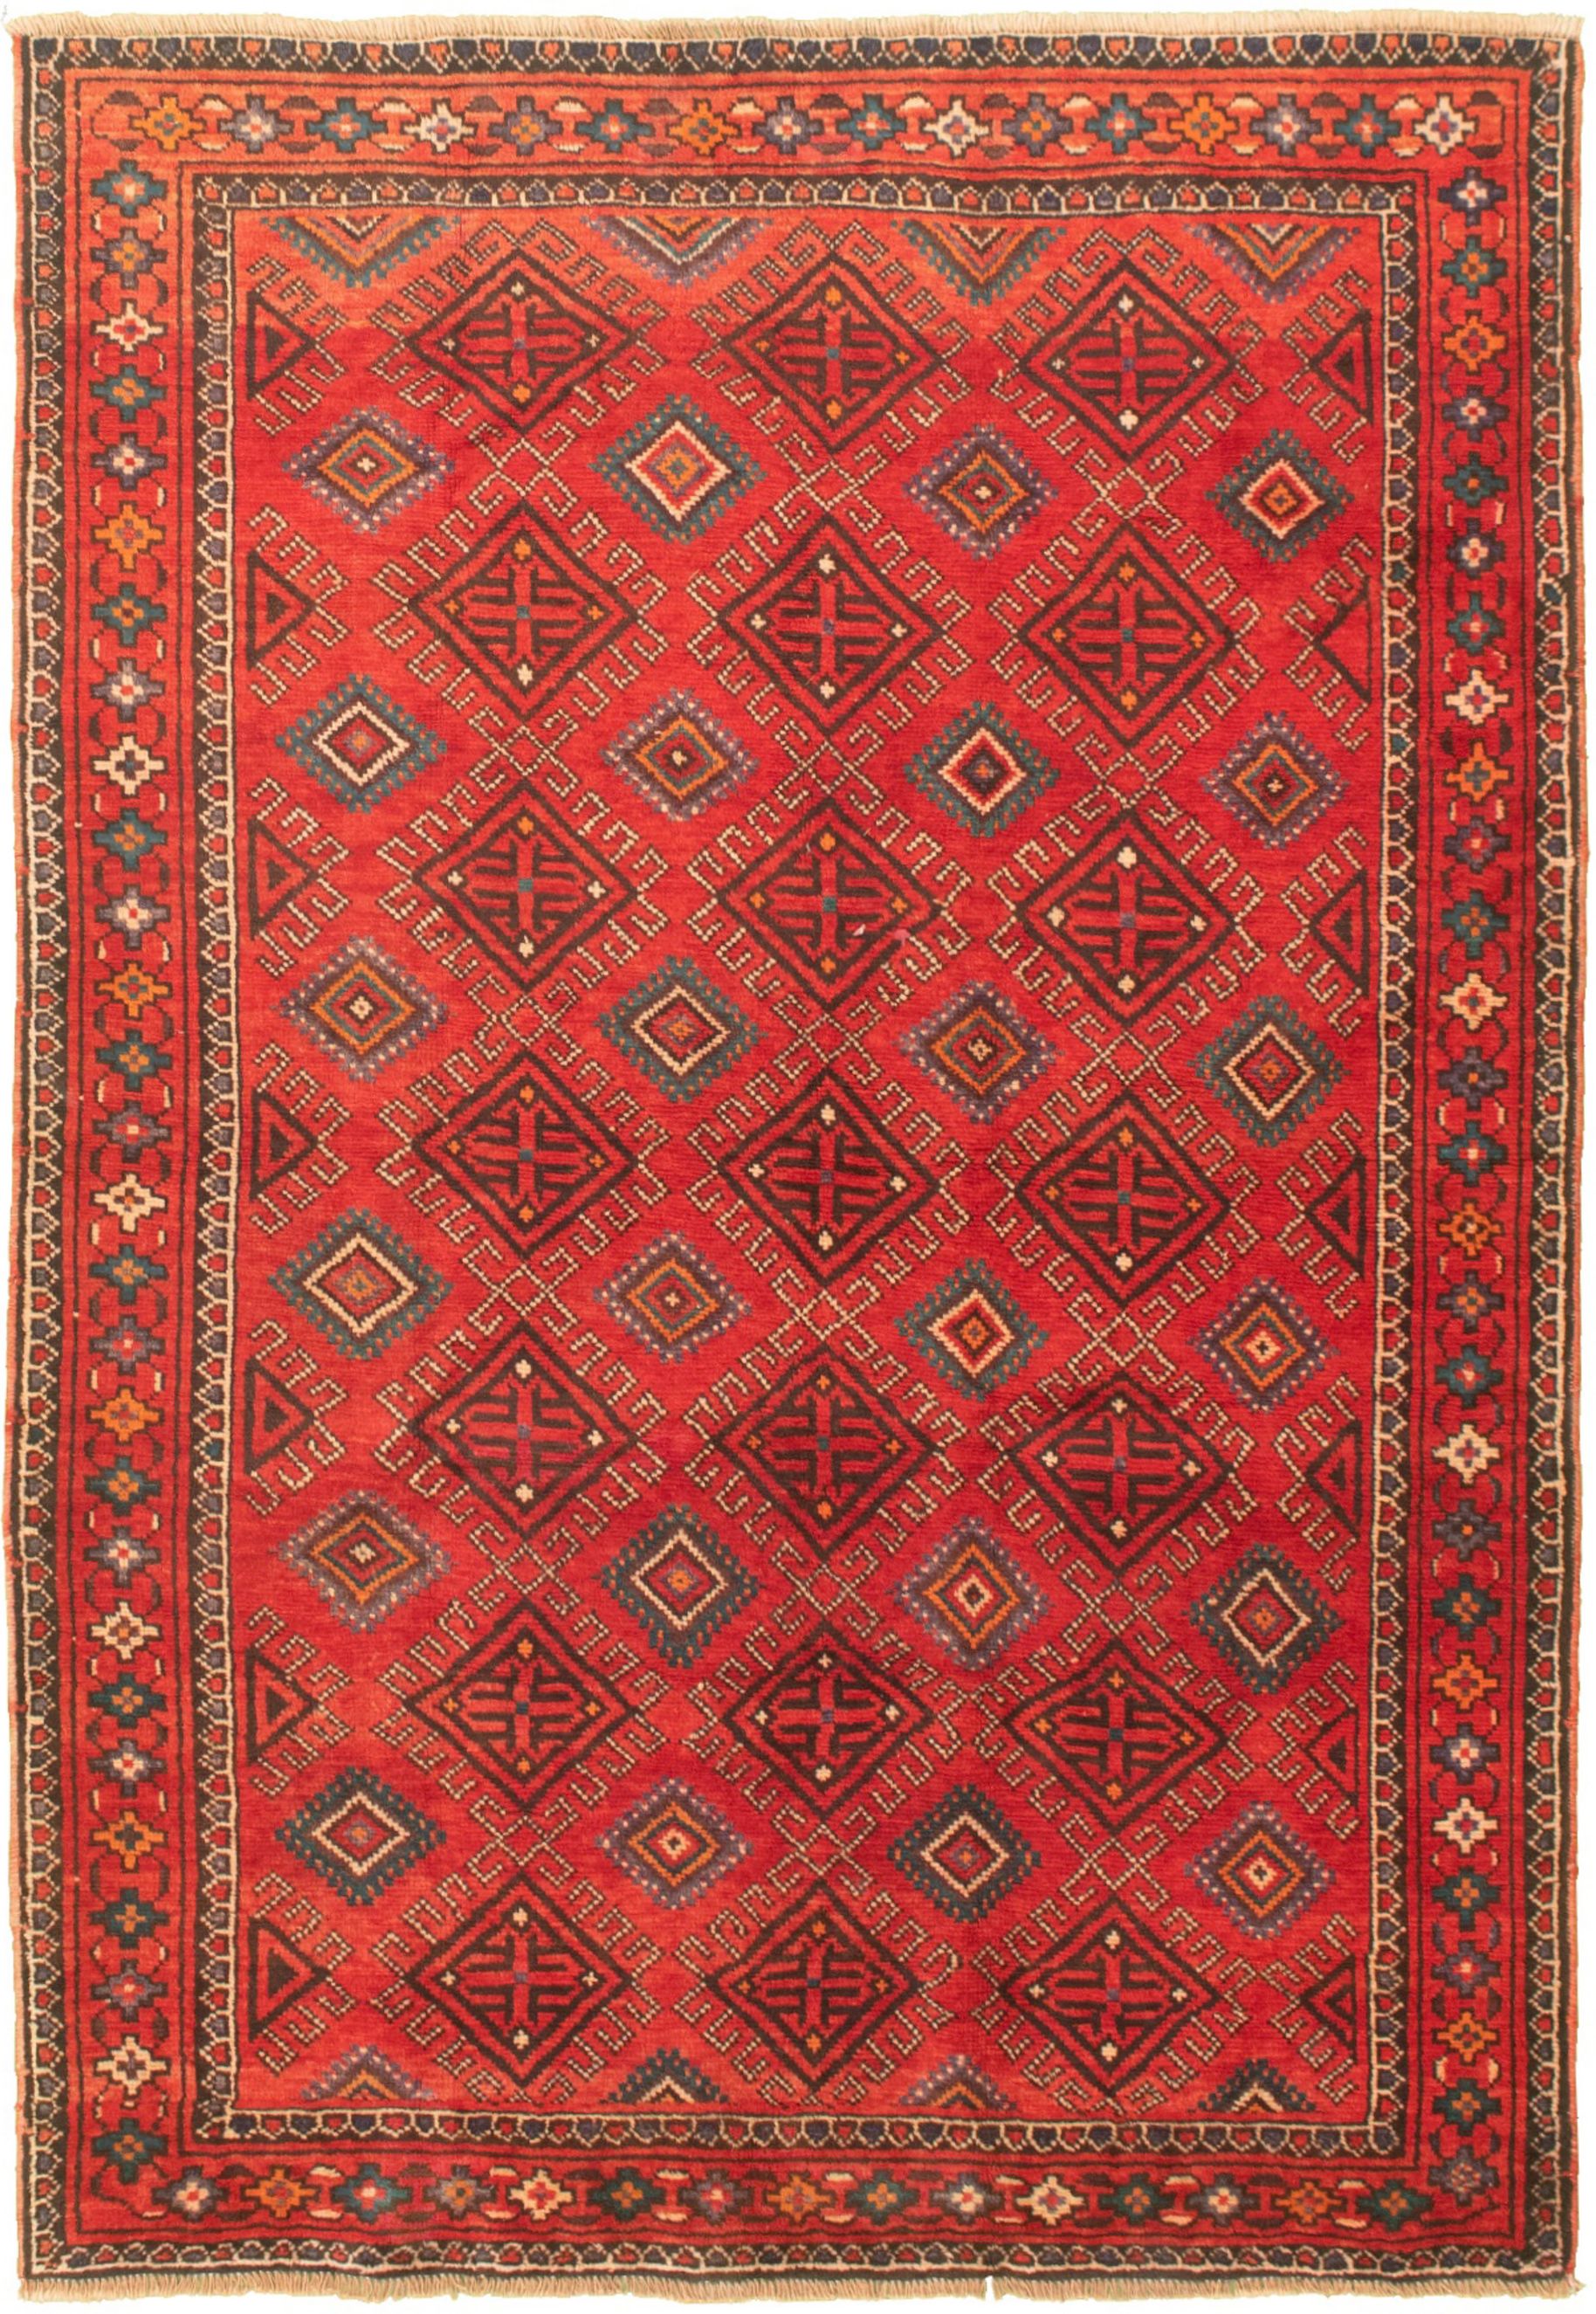 Hand-knotted Authentic Turkish Dark Copper Wool Rug 4'11" x 7'5"  Size: 4'11" x 7'5"  